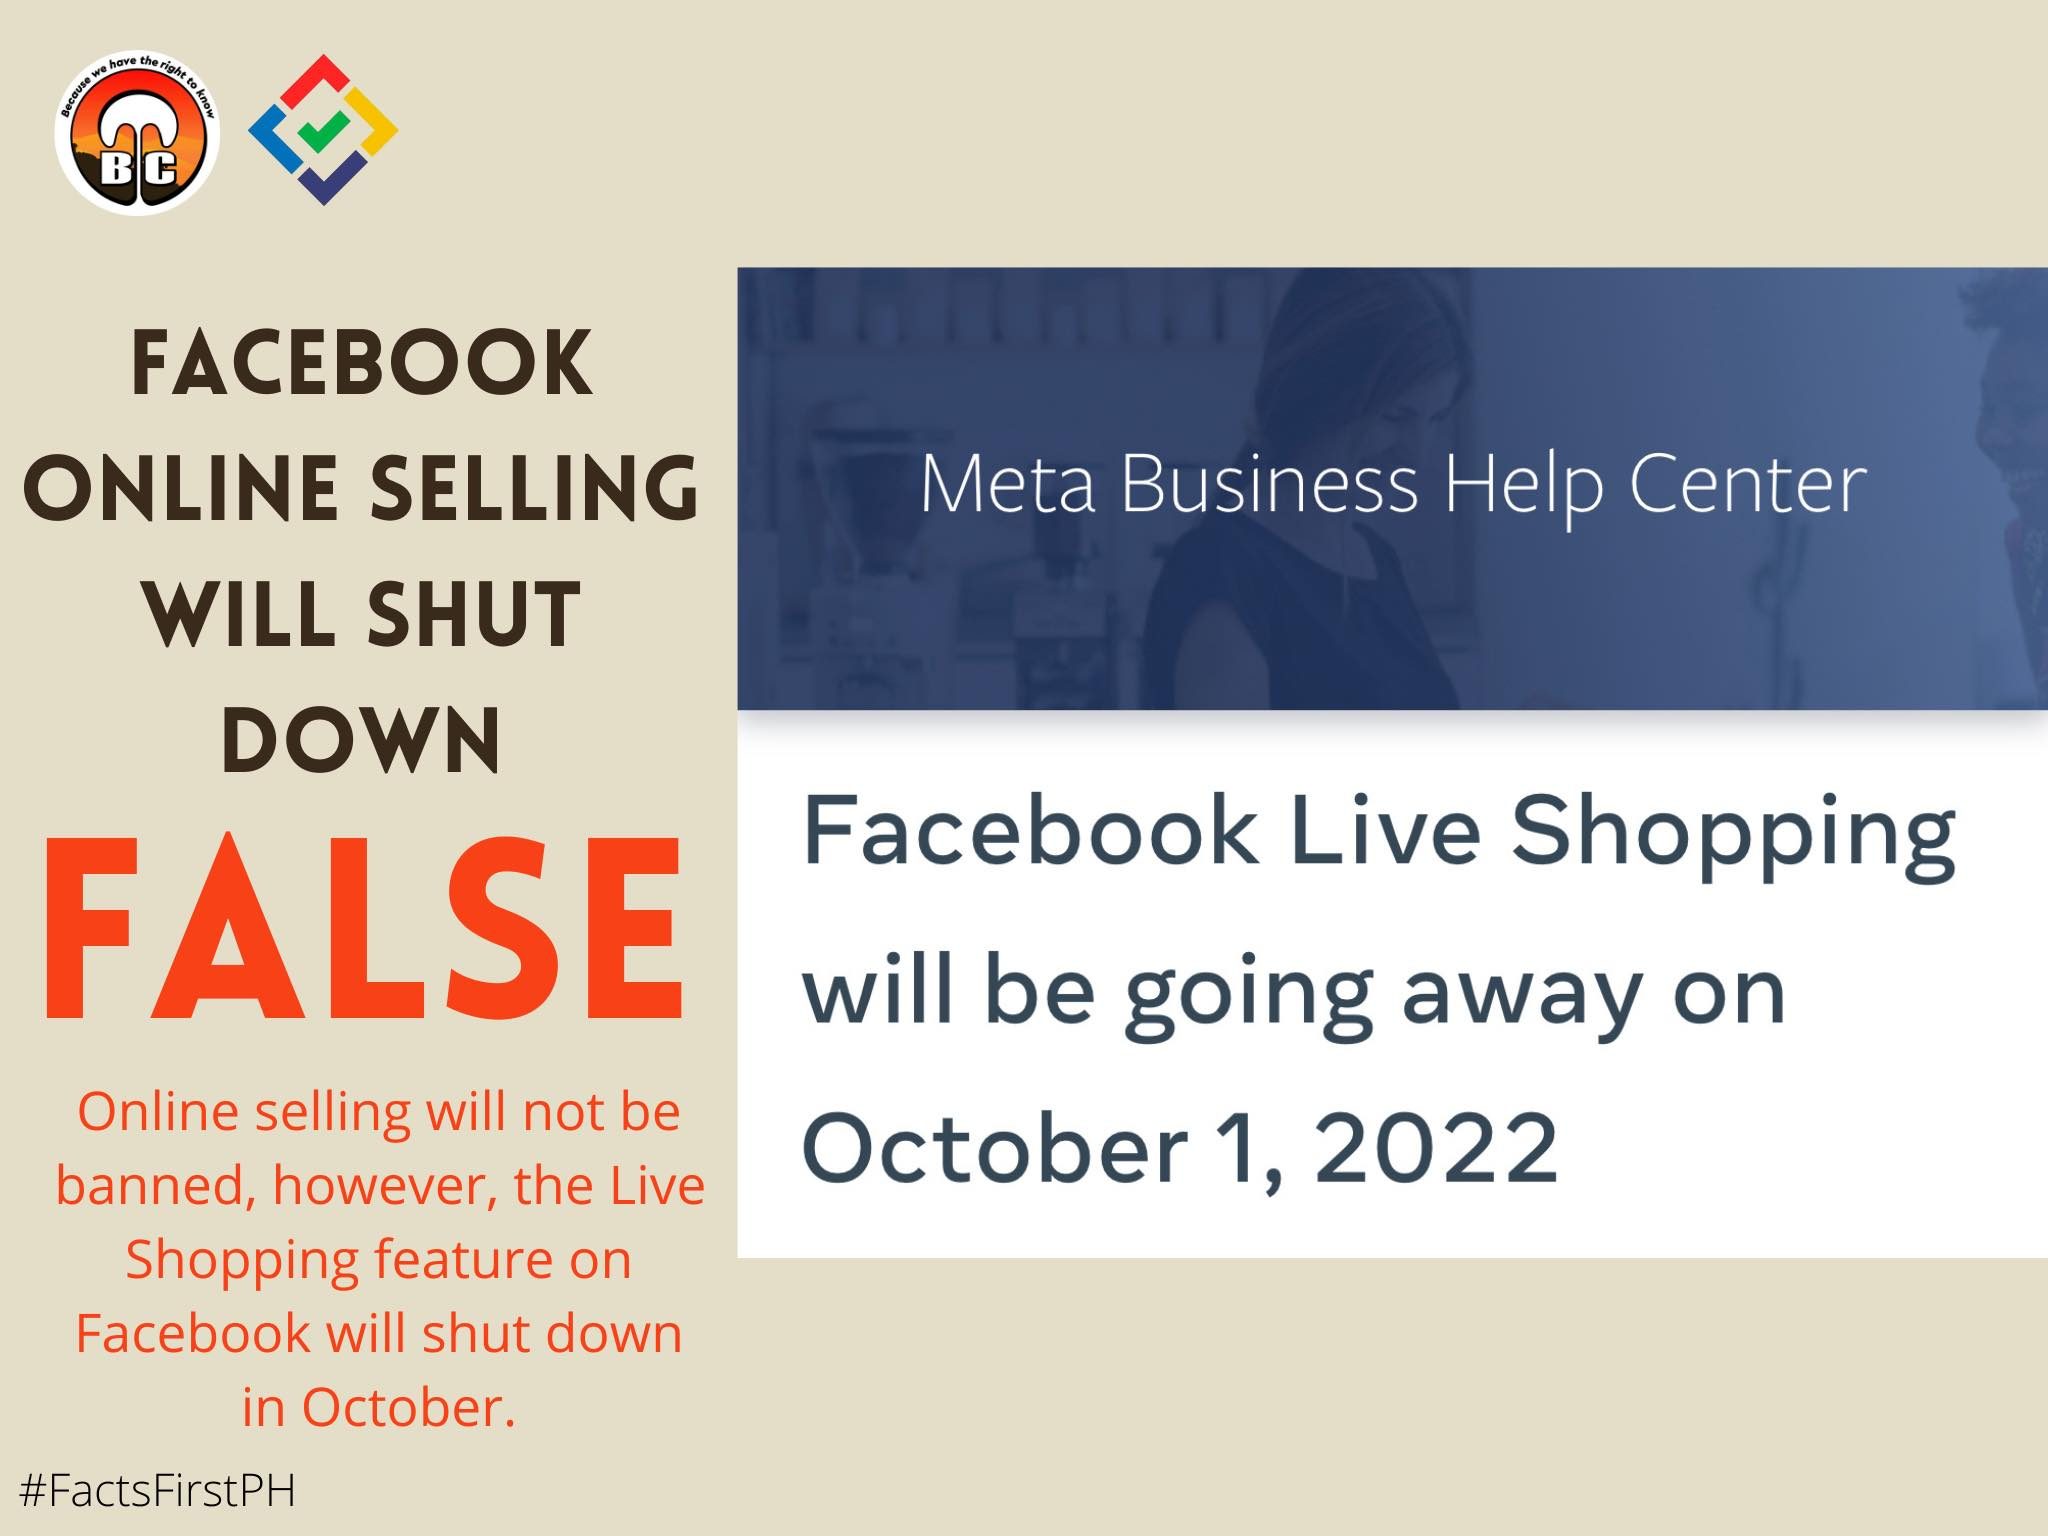 FACT CHECK: Facebook Online Selling will shut down #FactsFirstPH